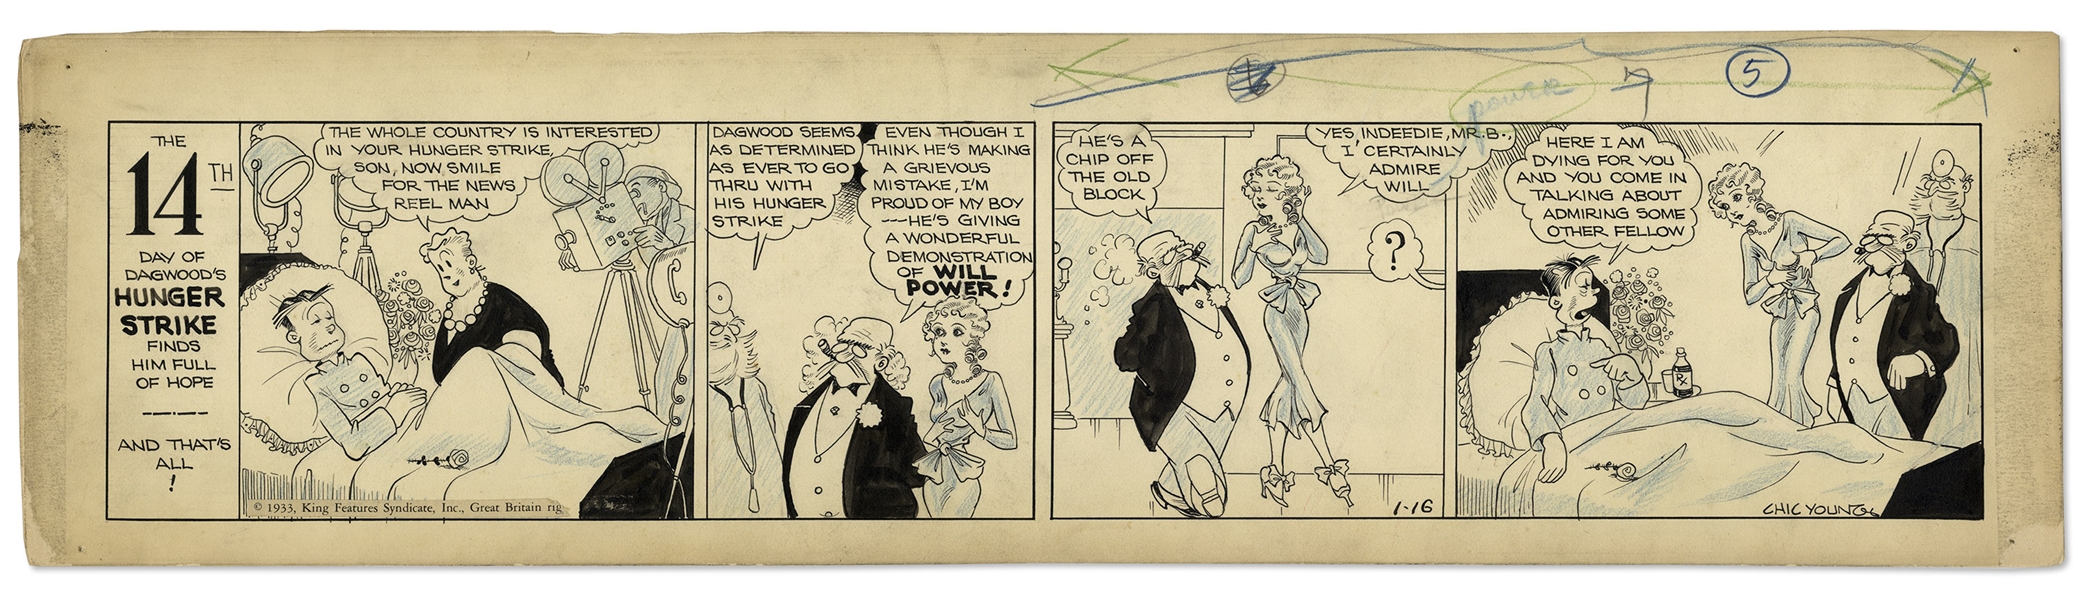 Chic Young Hand-Drawn ''Blondie'' Comic Strip From 1933 Titled ''Fickle Female'' -- Day 14 of Dagwood's Hunger Strike!